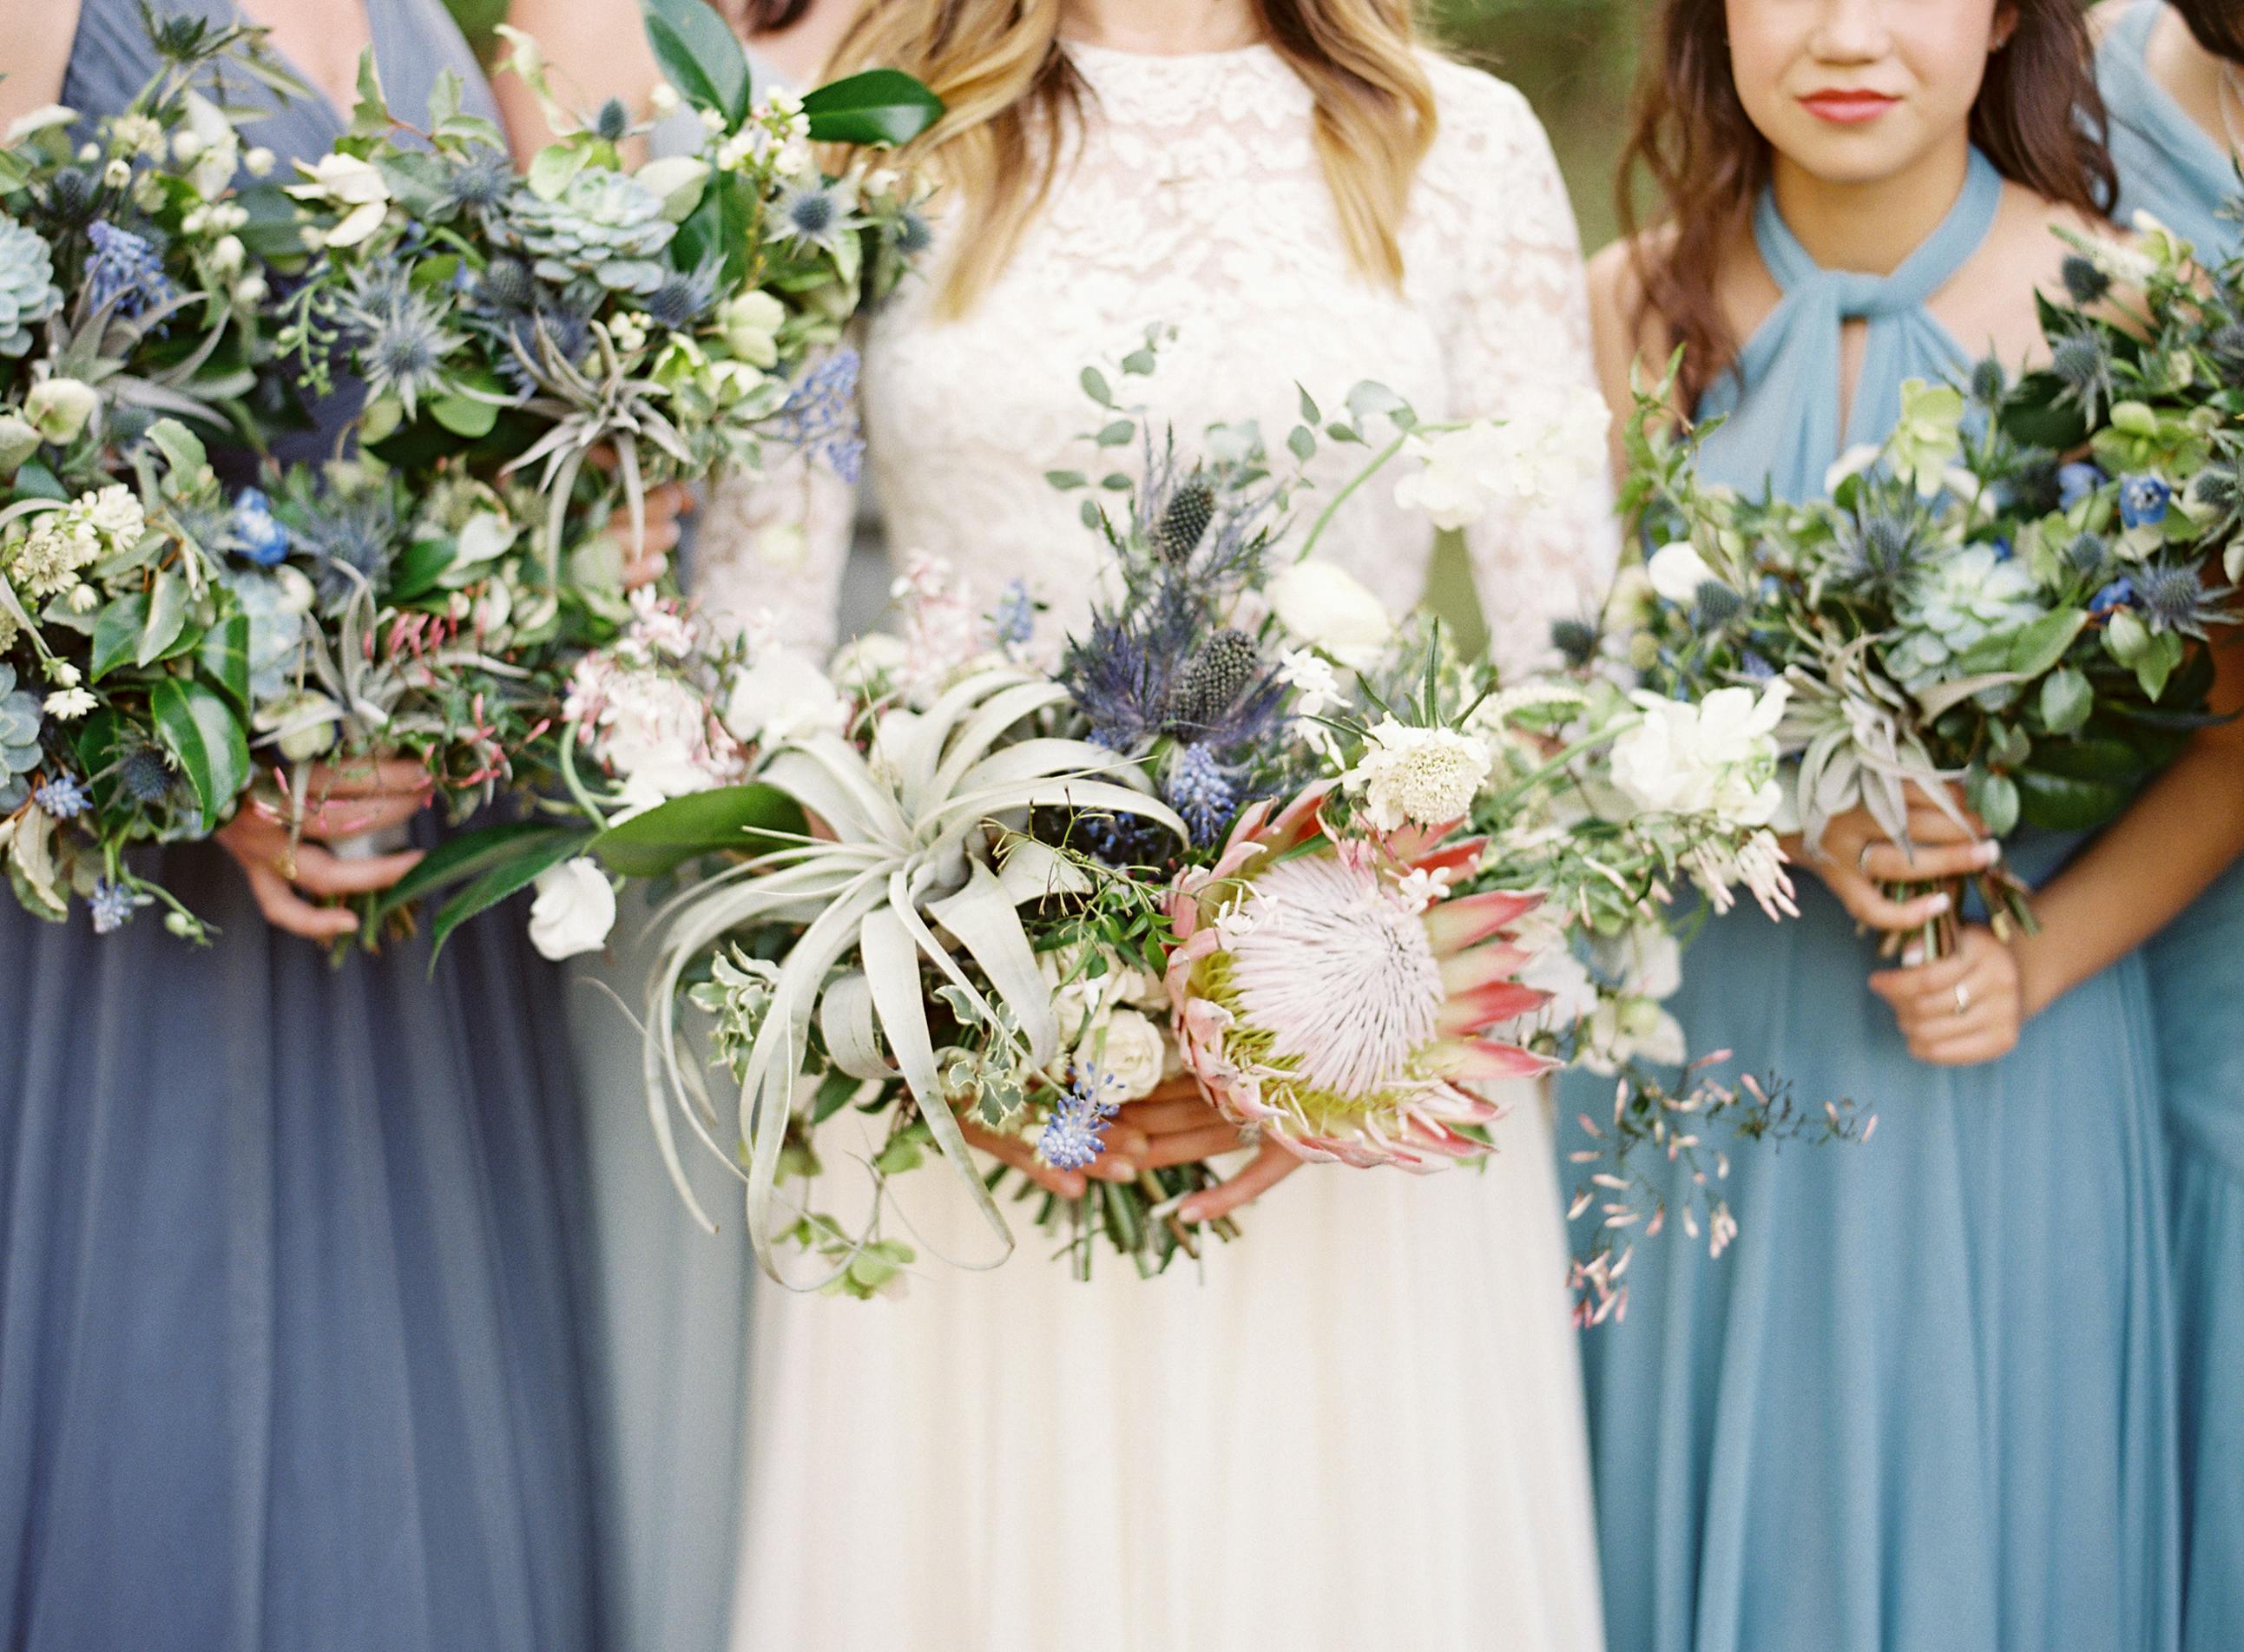 7 Spring Wedding Colors for a Romantic Wedding - PartySlate